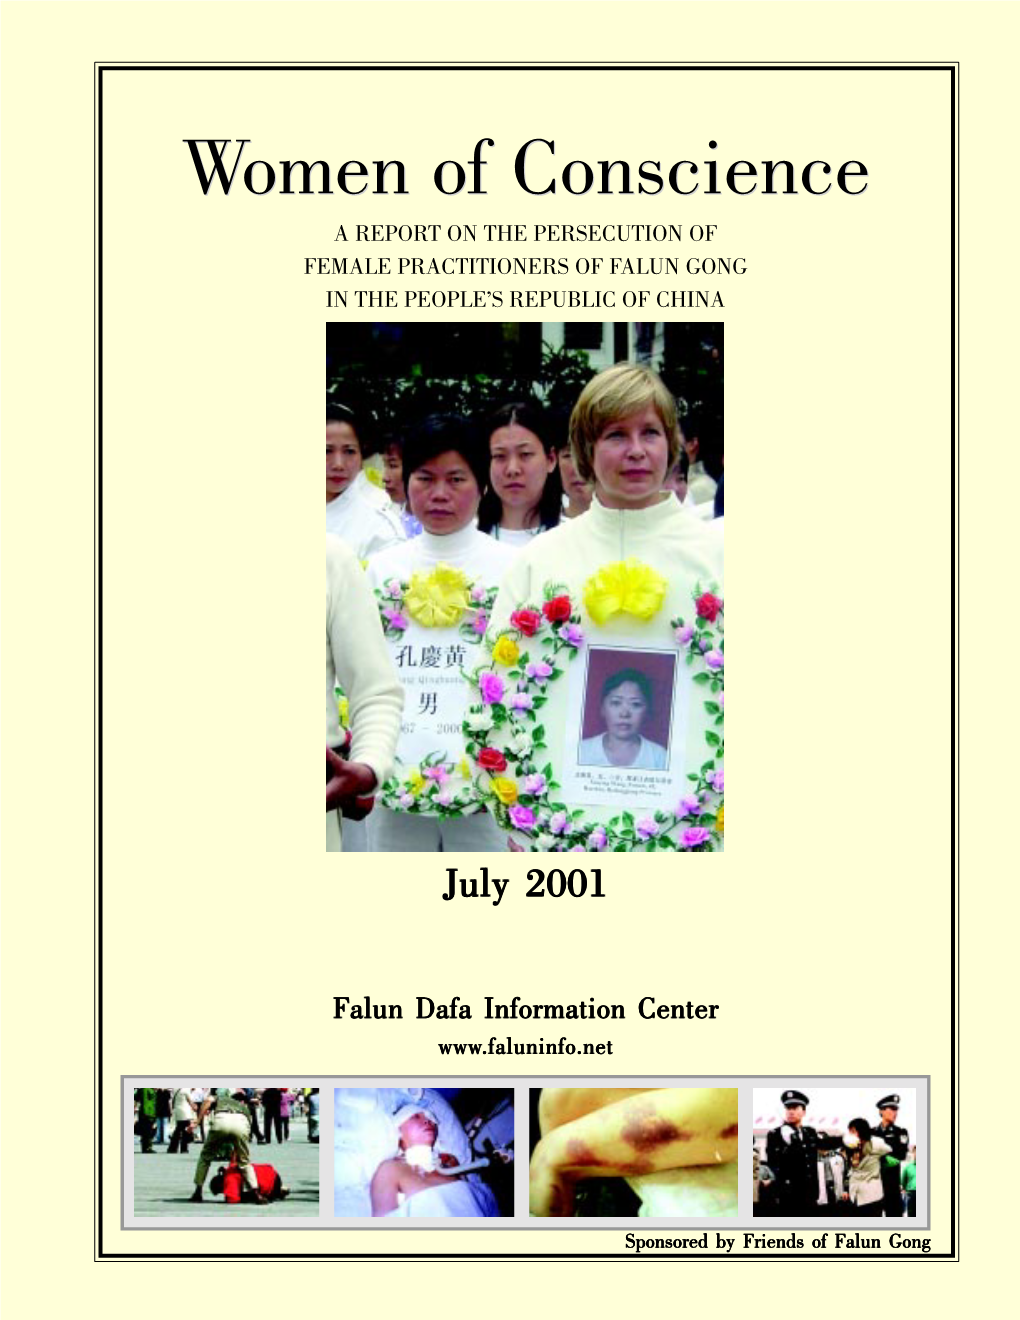 Women of Conscience a REPORT on the PERSECUTION of FEMALE PRACTITIONERS of FALUN GONG in the PEOPLE’S REPUBLIC of CHINA